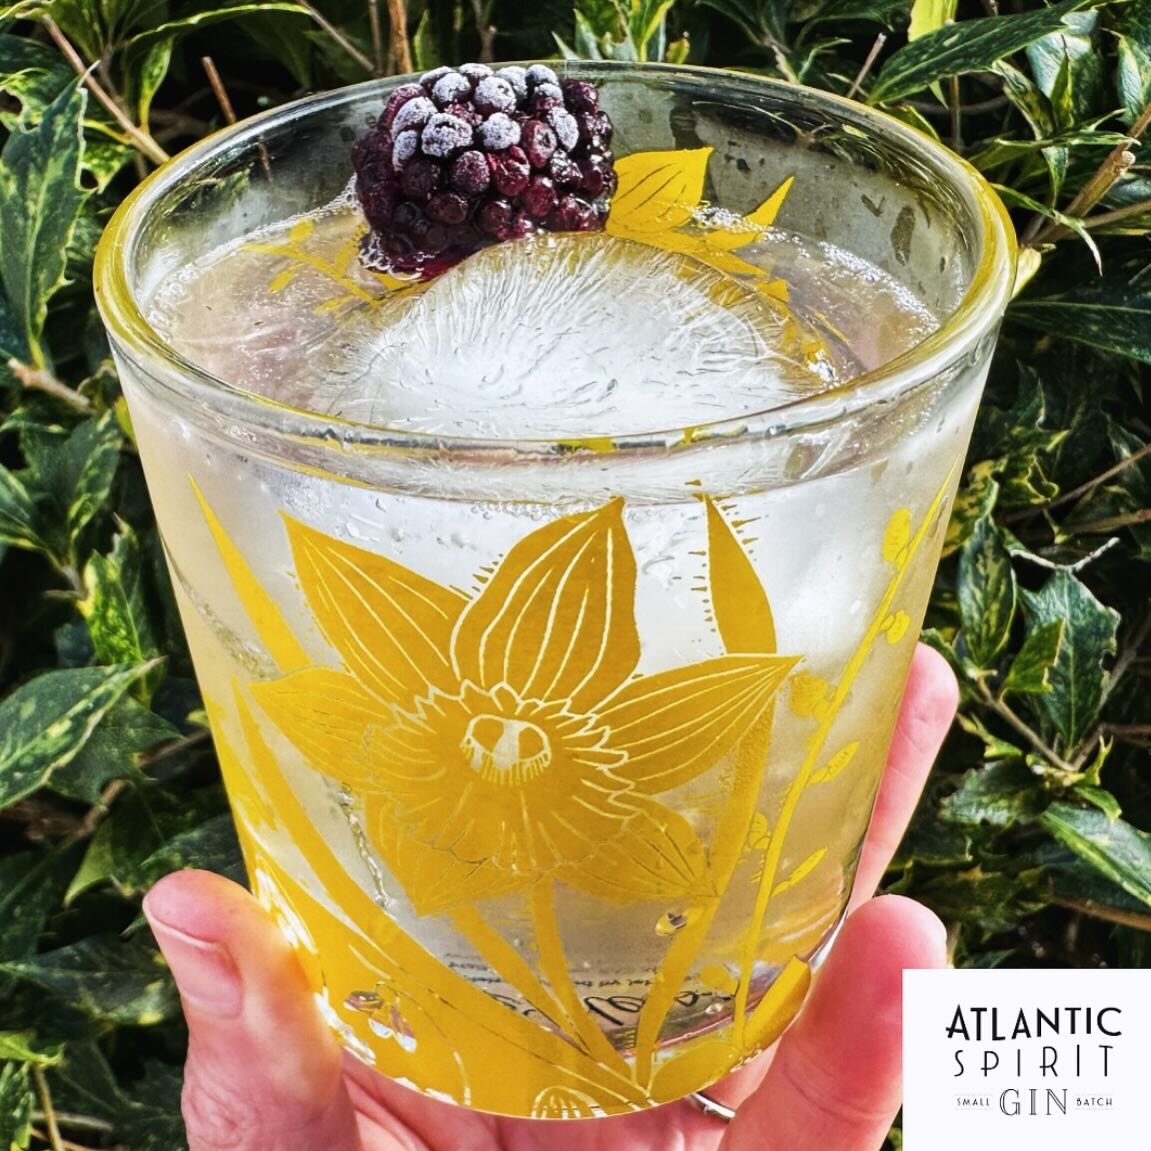 Lovely to see my Spring daffodil glass being put to good use @atlanticspirit featured here full of Samphire Gin and tonic. (Not sponsored) #kateheiss #daffodil #springhomedecor #springhomewares design licensed by @jehane_ltd for @halfmoonbaybydesign